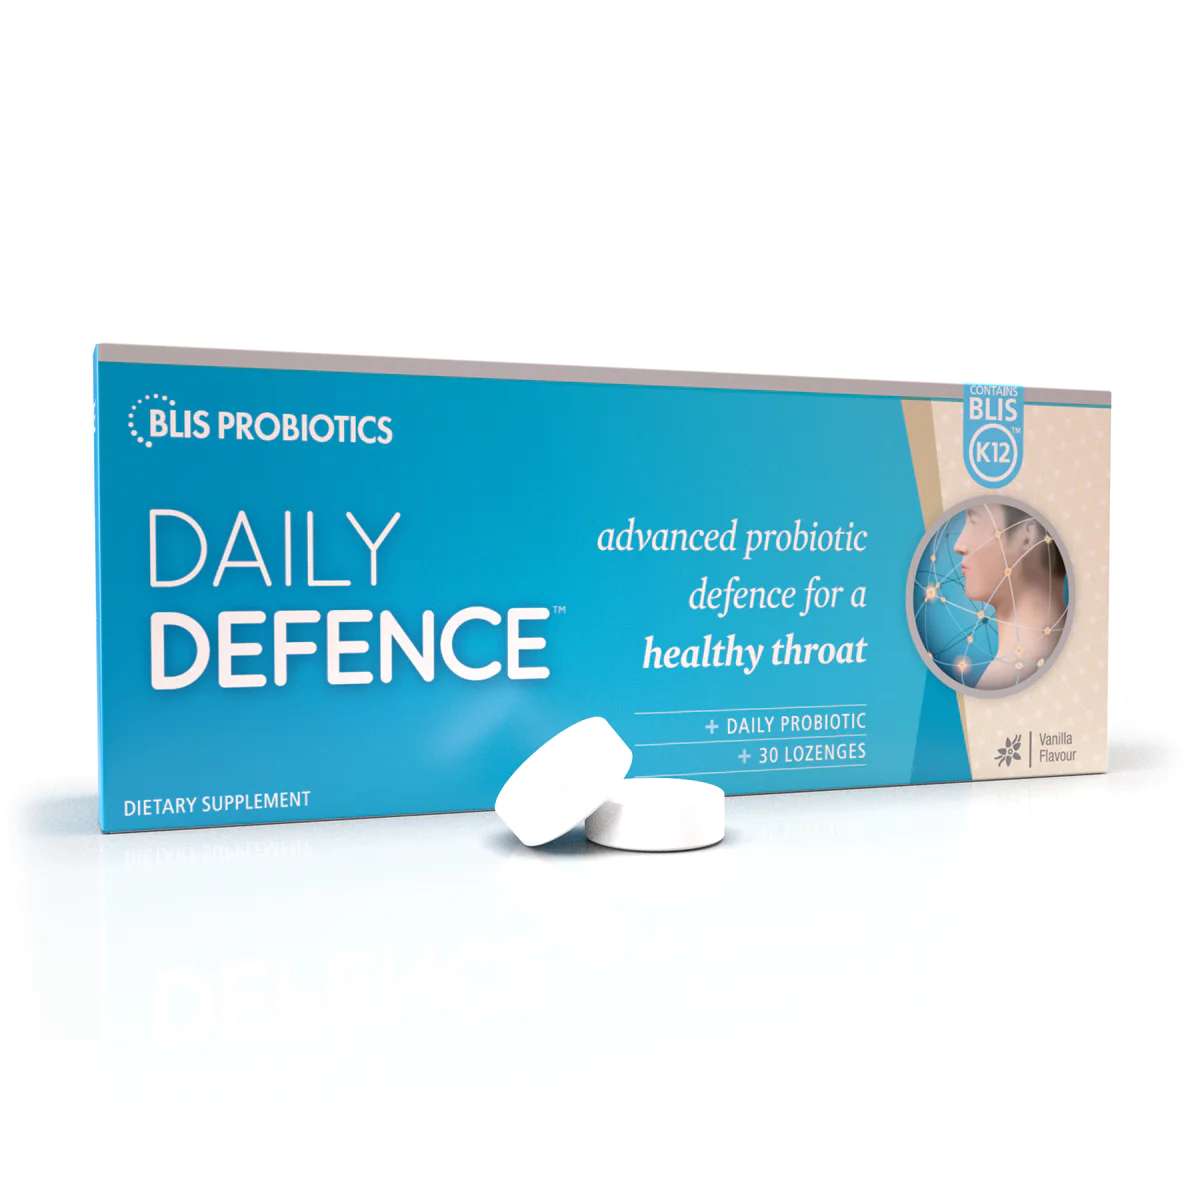 Daily Defence Vanilla Flavour - adanced probiotics for throat health and immunity support